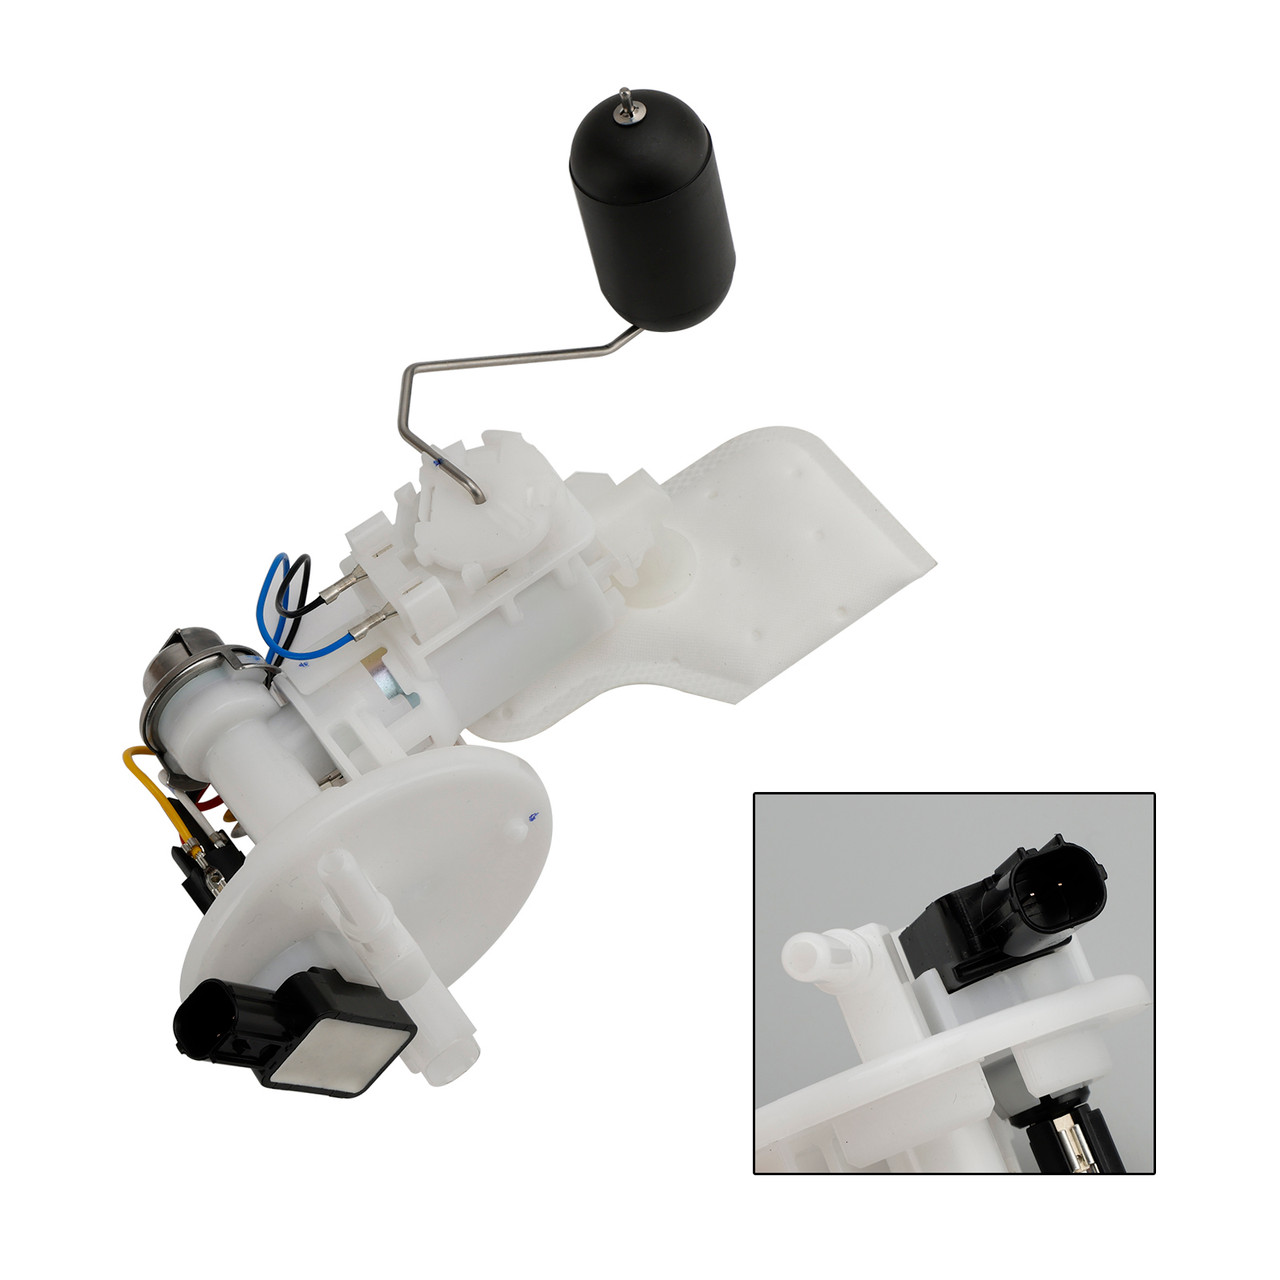 Fuel Pump Assy 2Ph-E3907-00 Replace For Yamaha Mio125 M3 125 Fino 125 Gt125 2015